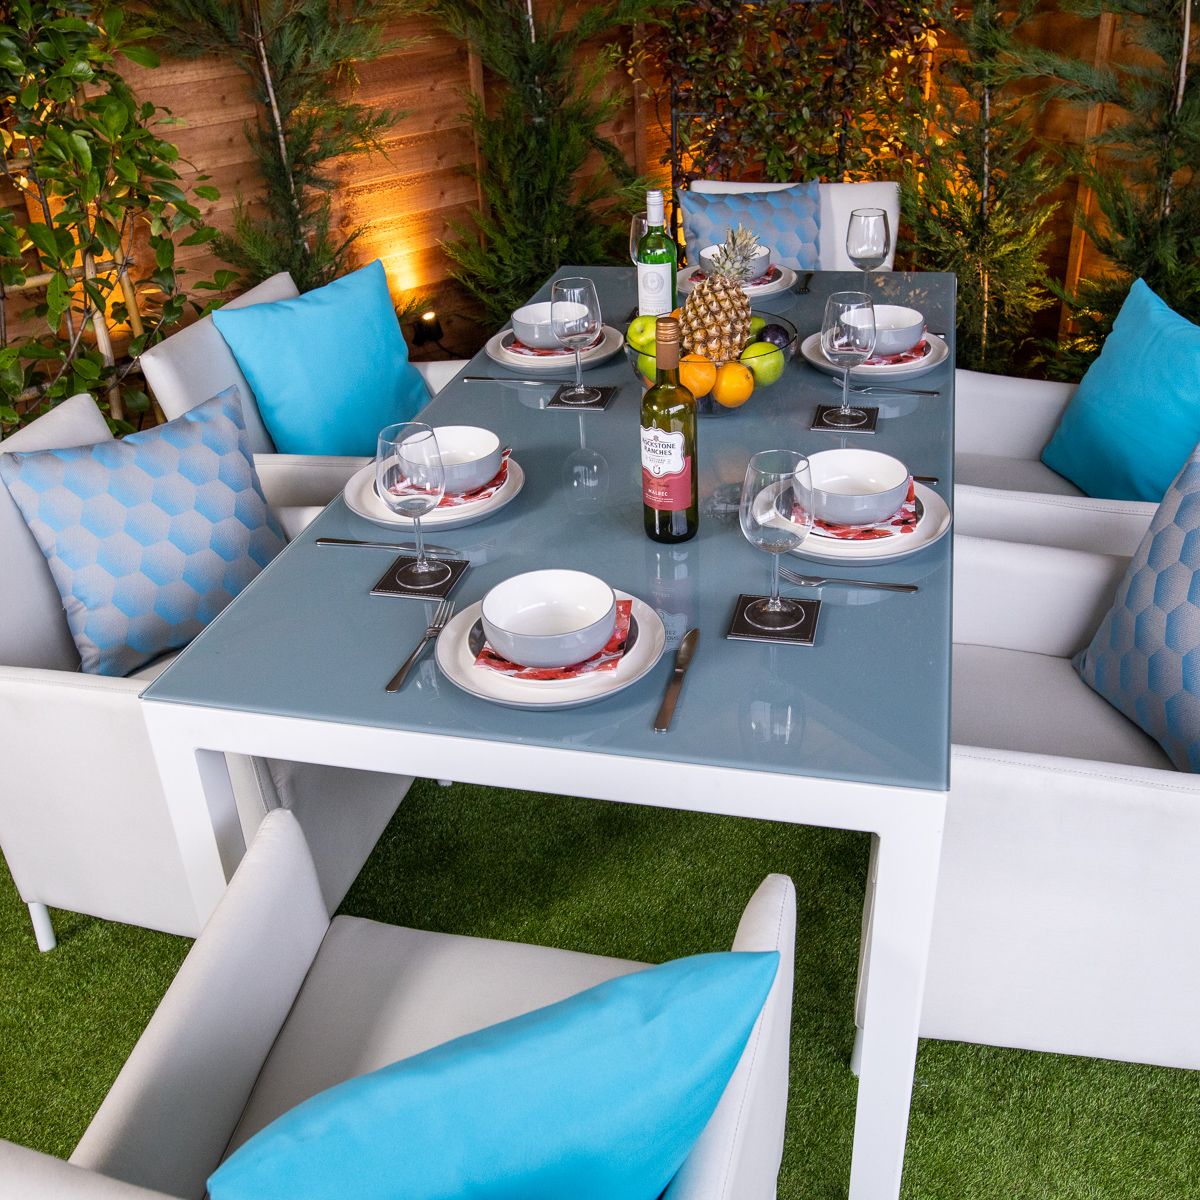 Create Your Dream Patio: How to Choose the Best Furniture for Your Outdoor Living Space